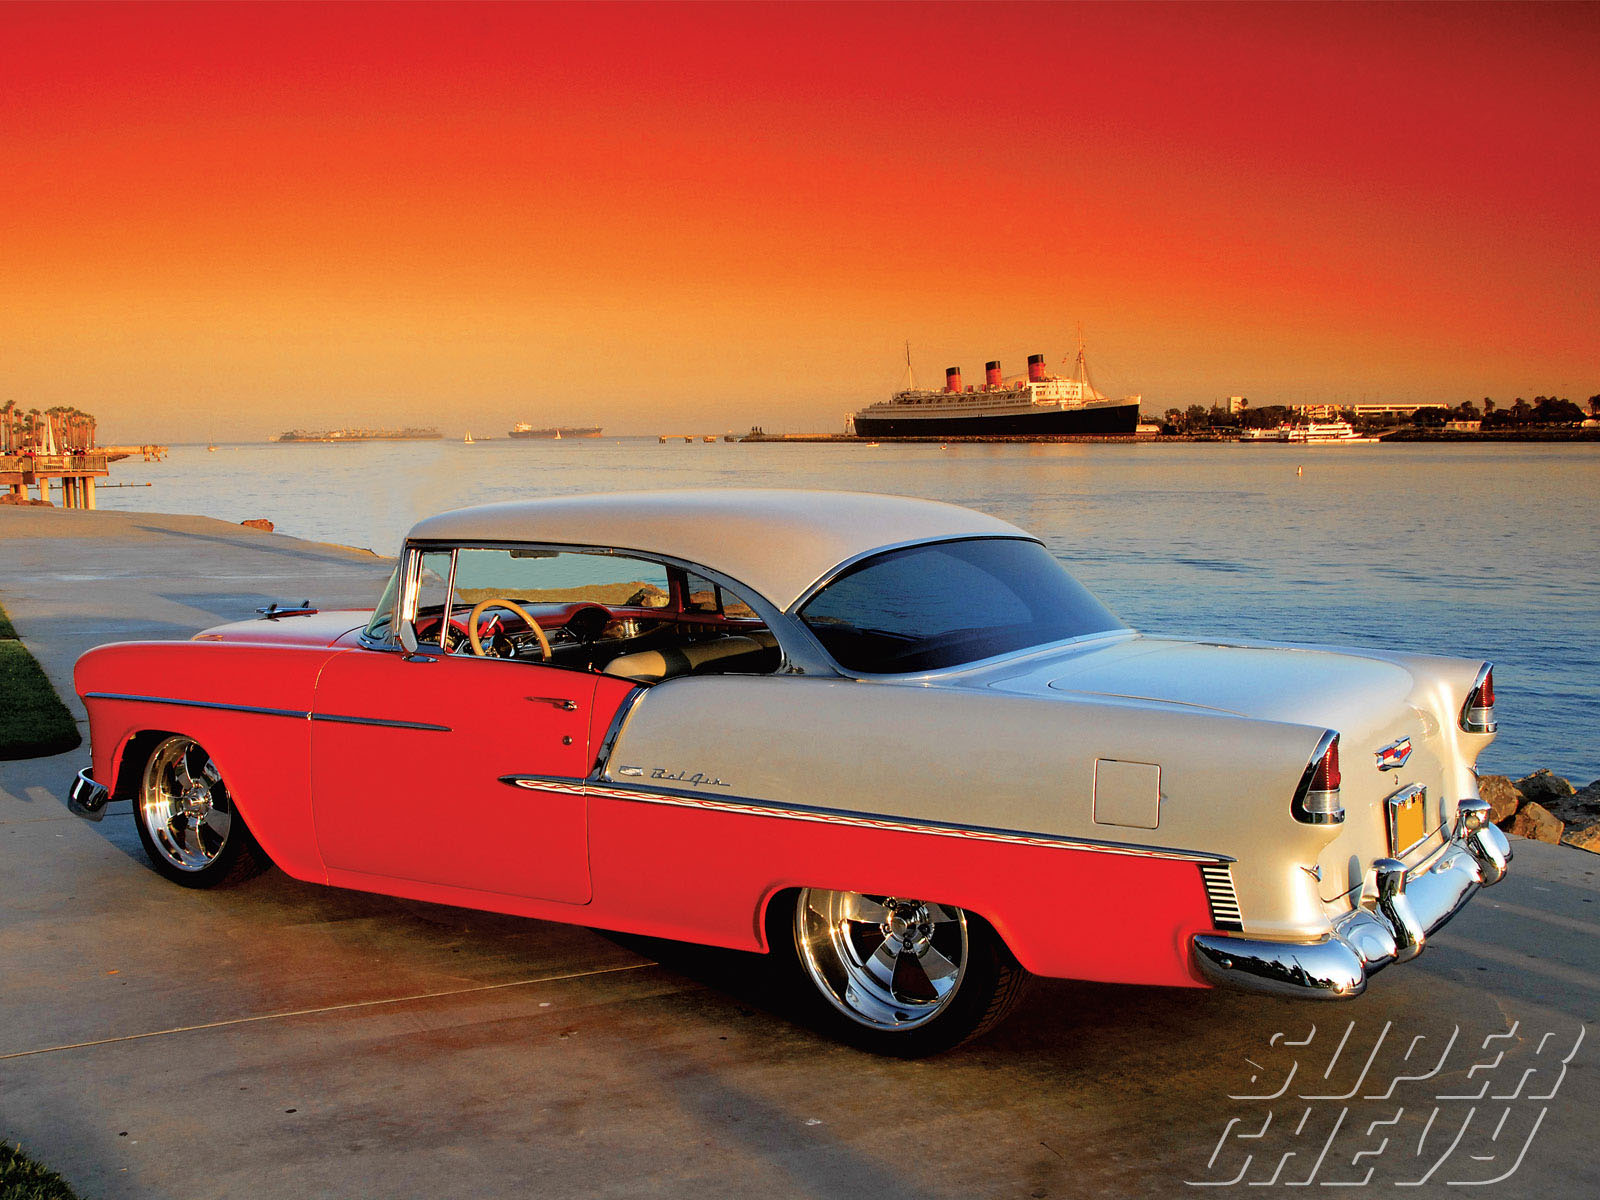 Classic red Chevrolet Bel Air from 1955